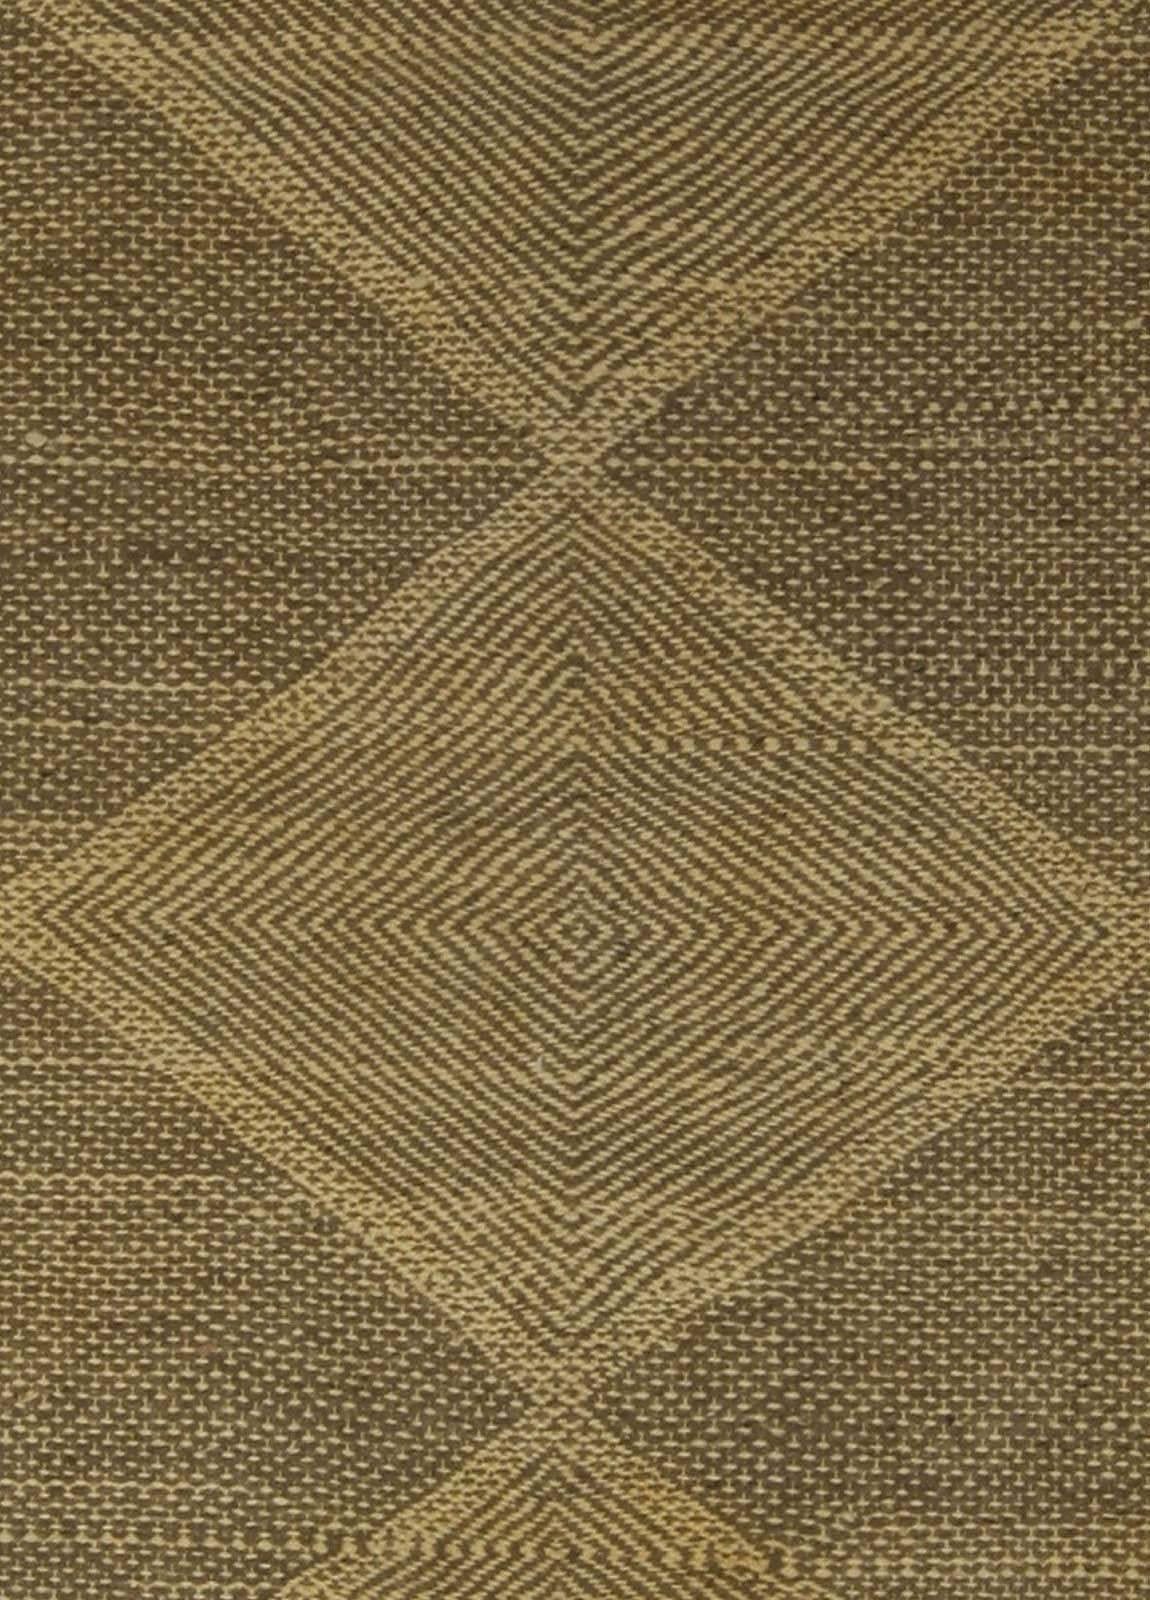 Contemporary diamond shaped brown and beige flat-weave rug by Doris Leslie Blau.
Size: 7'8